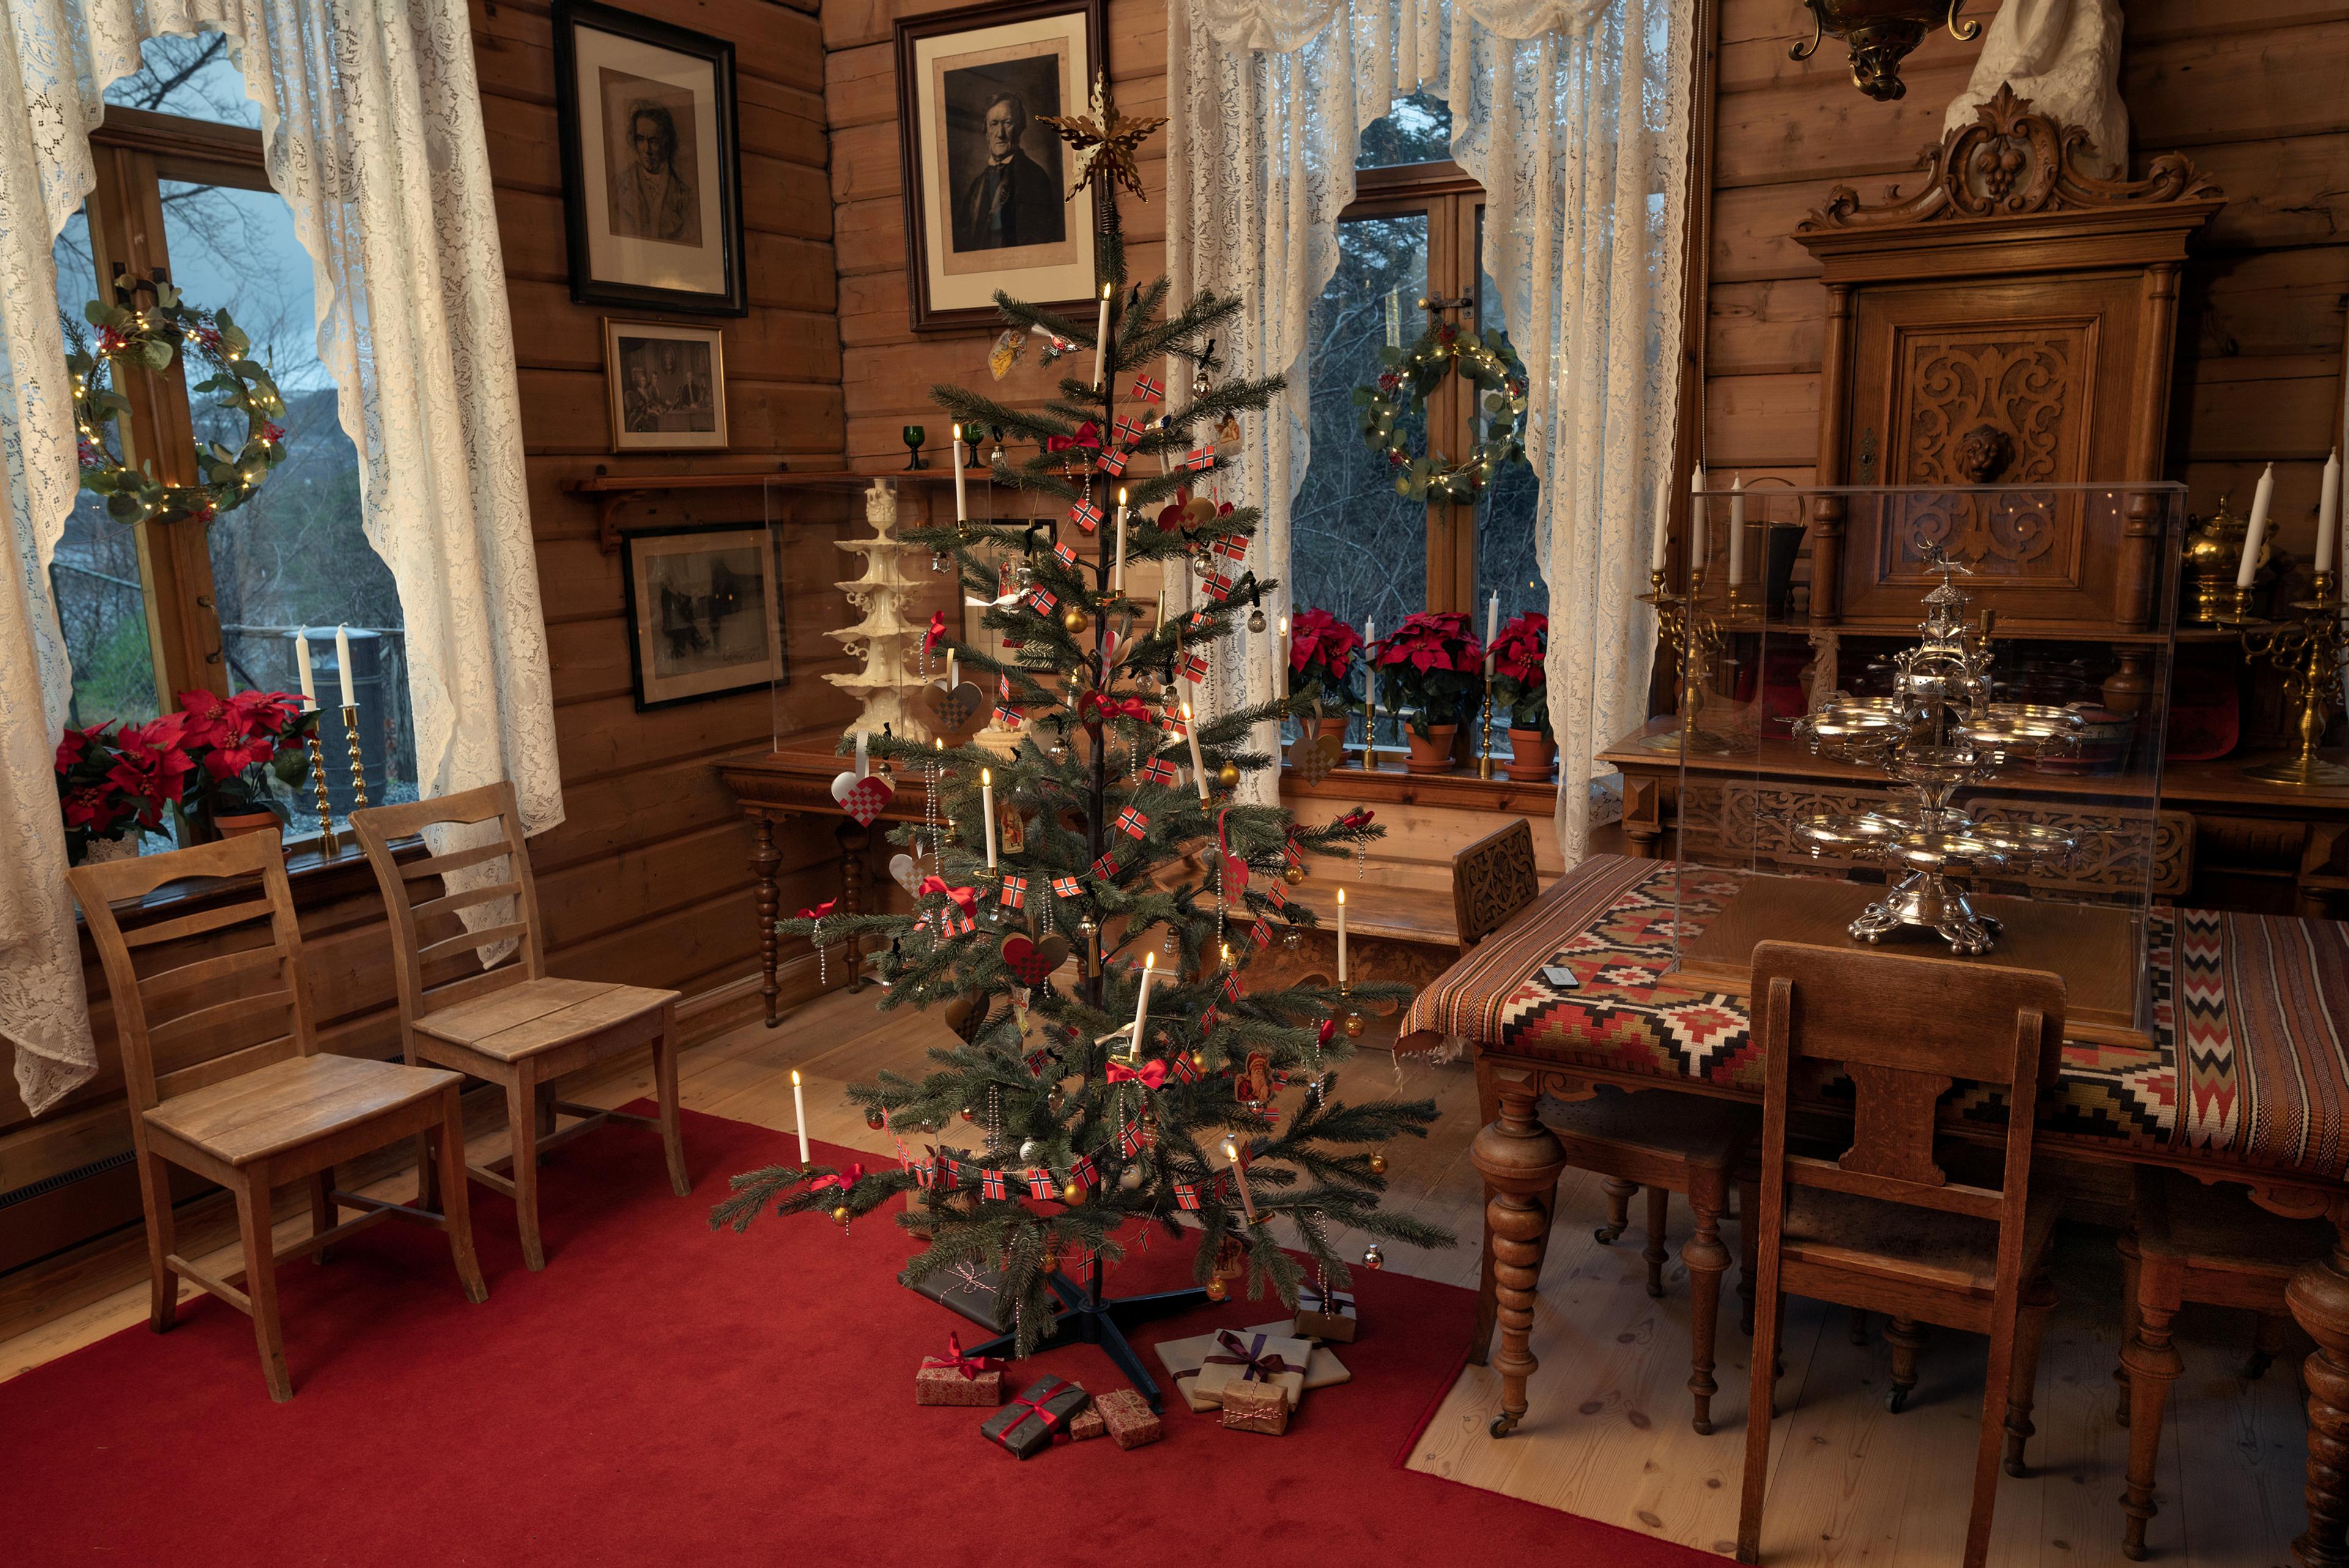 Interior photo from Edvard Grieg's villa displaying the dining room with table, chairs, memorabilia and a christmas tree.